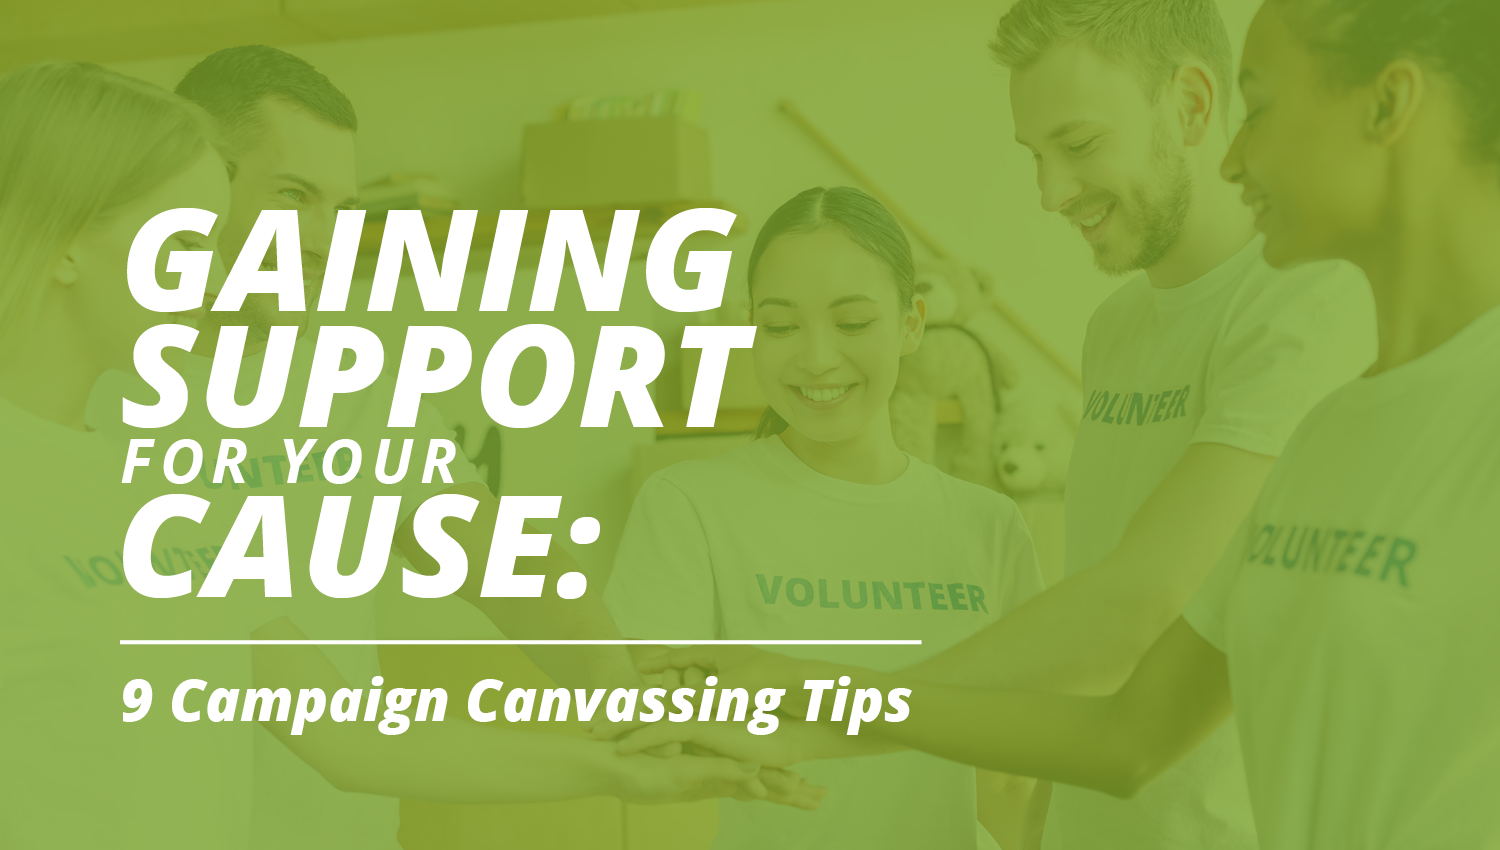 This article will go over how to gain support for your advocacy cause with nine campaign canvassing tips.